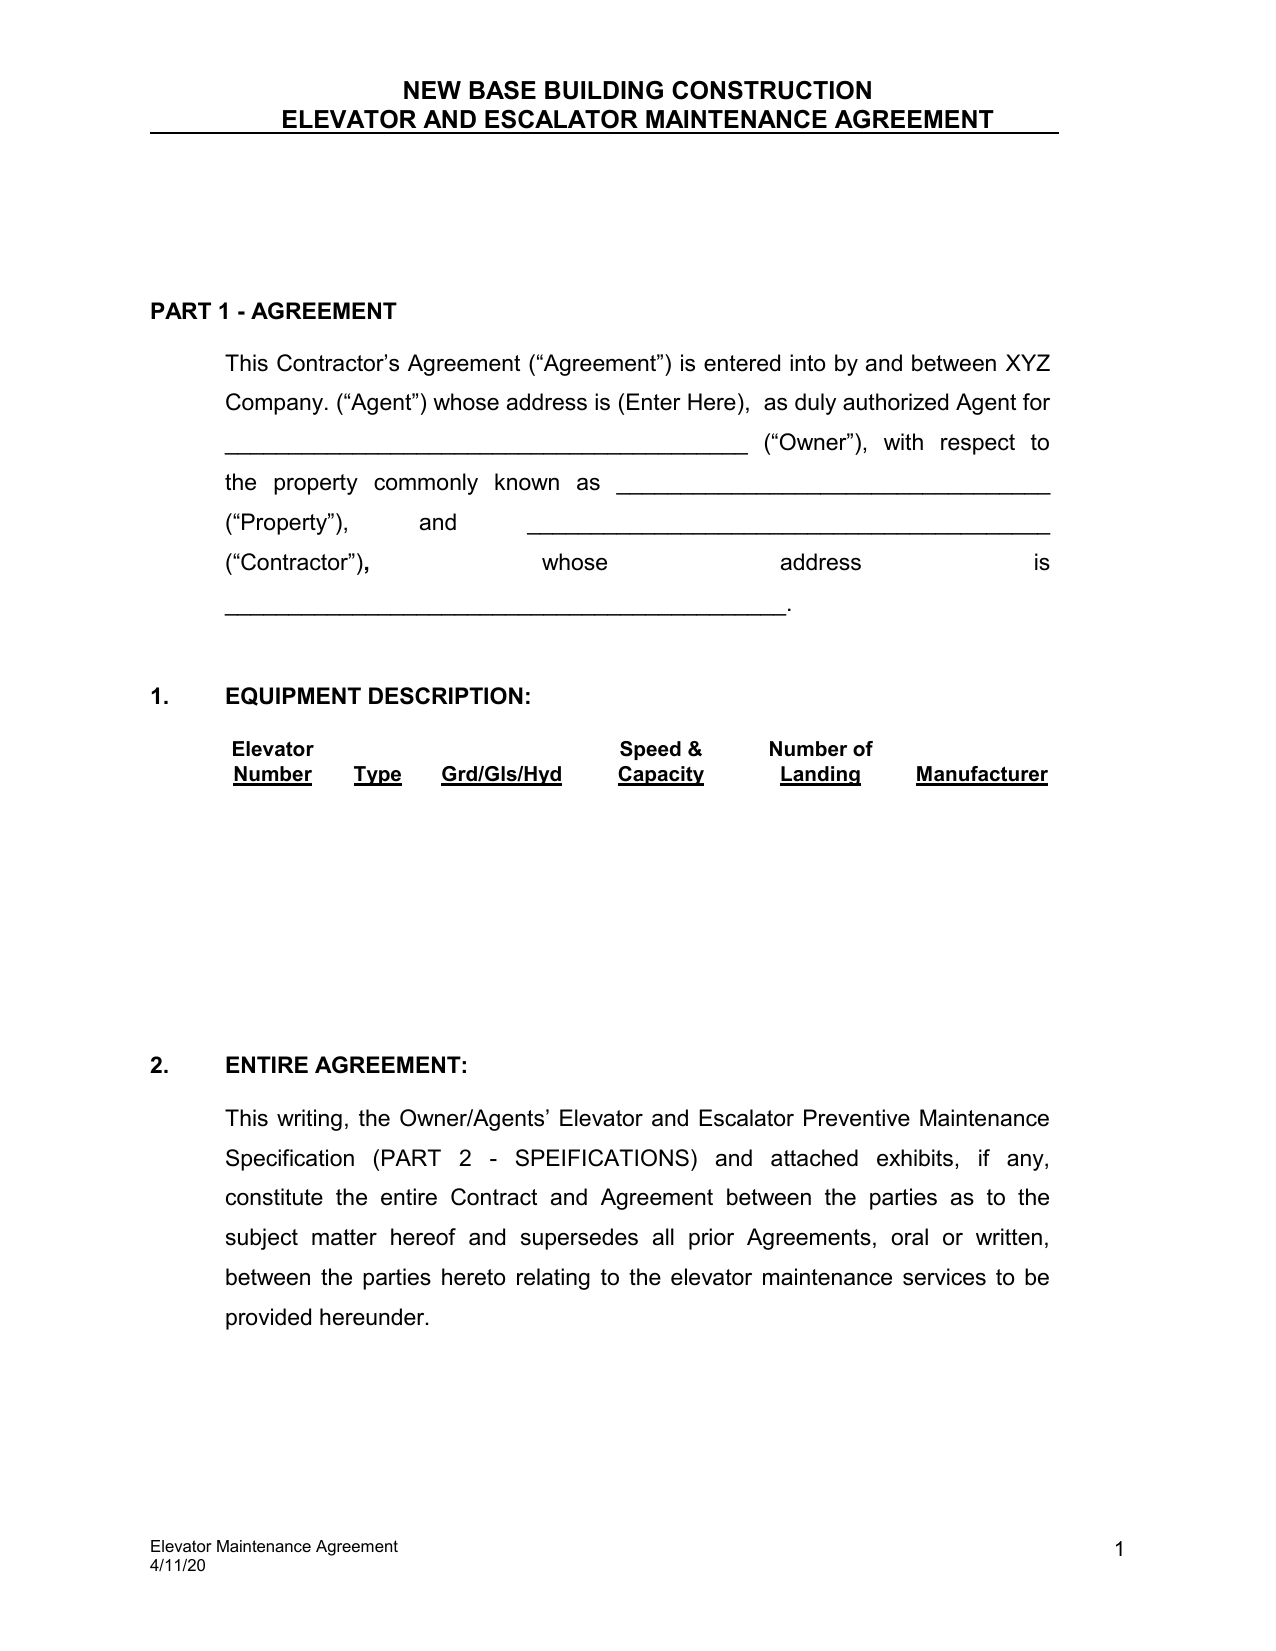 Elevator Maintenance Agreement and Specifications